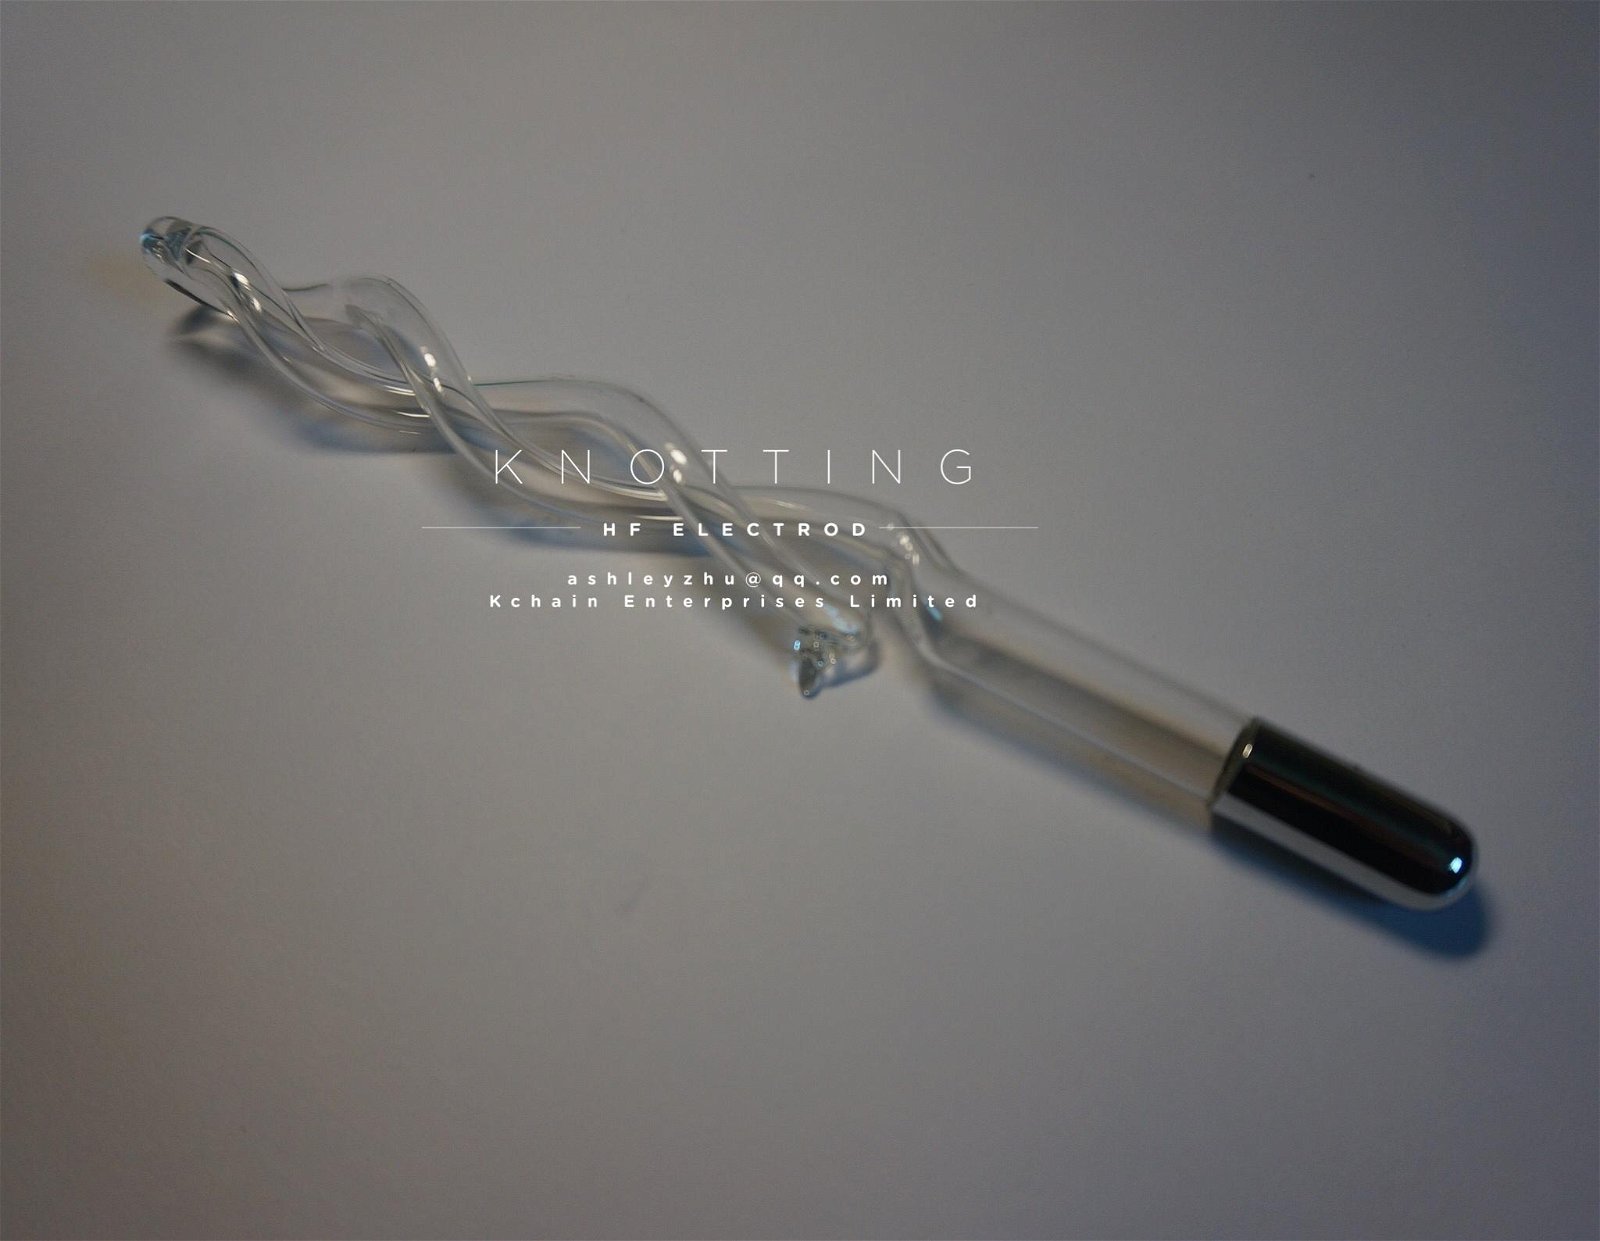 "KNOTTING" HIGH FREQUENCY ELECTRODE